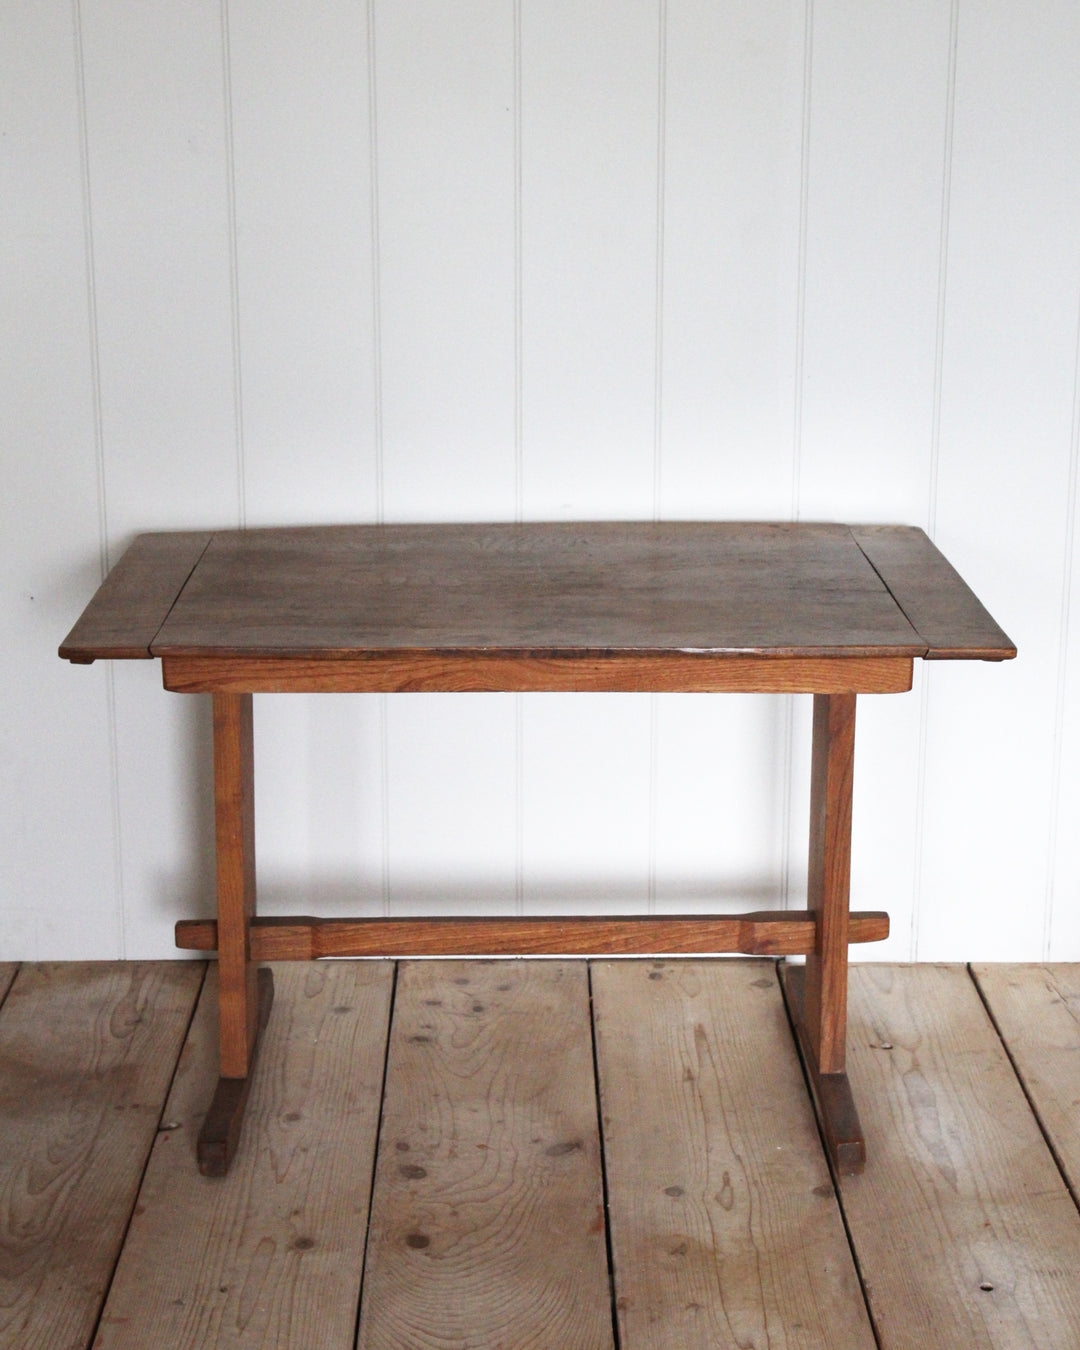 Ash Table - After Cotswold School